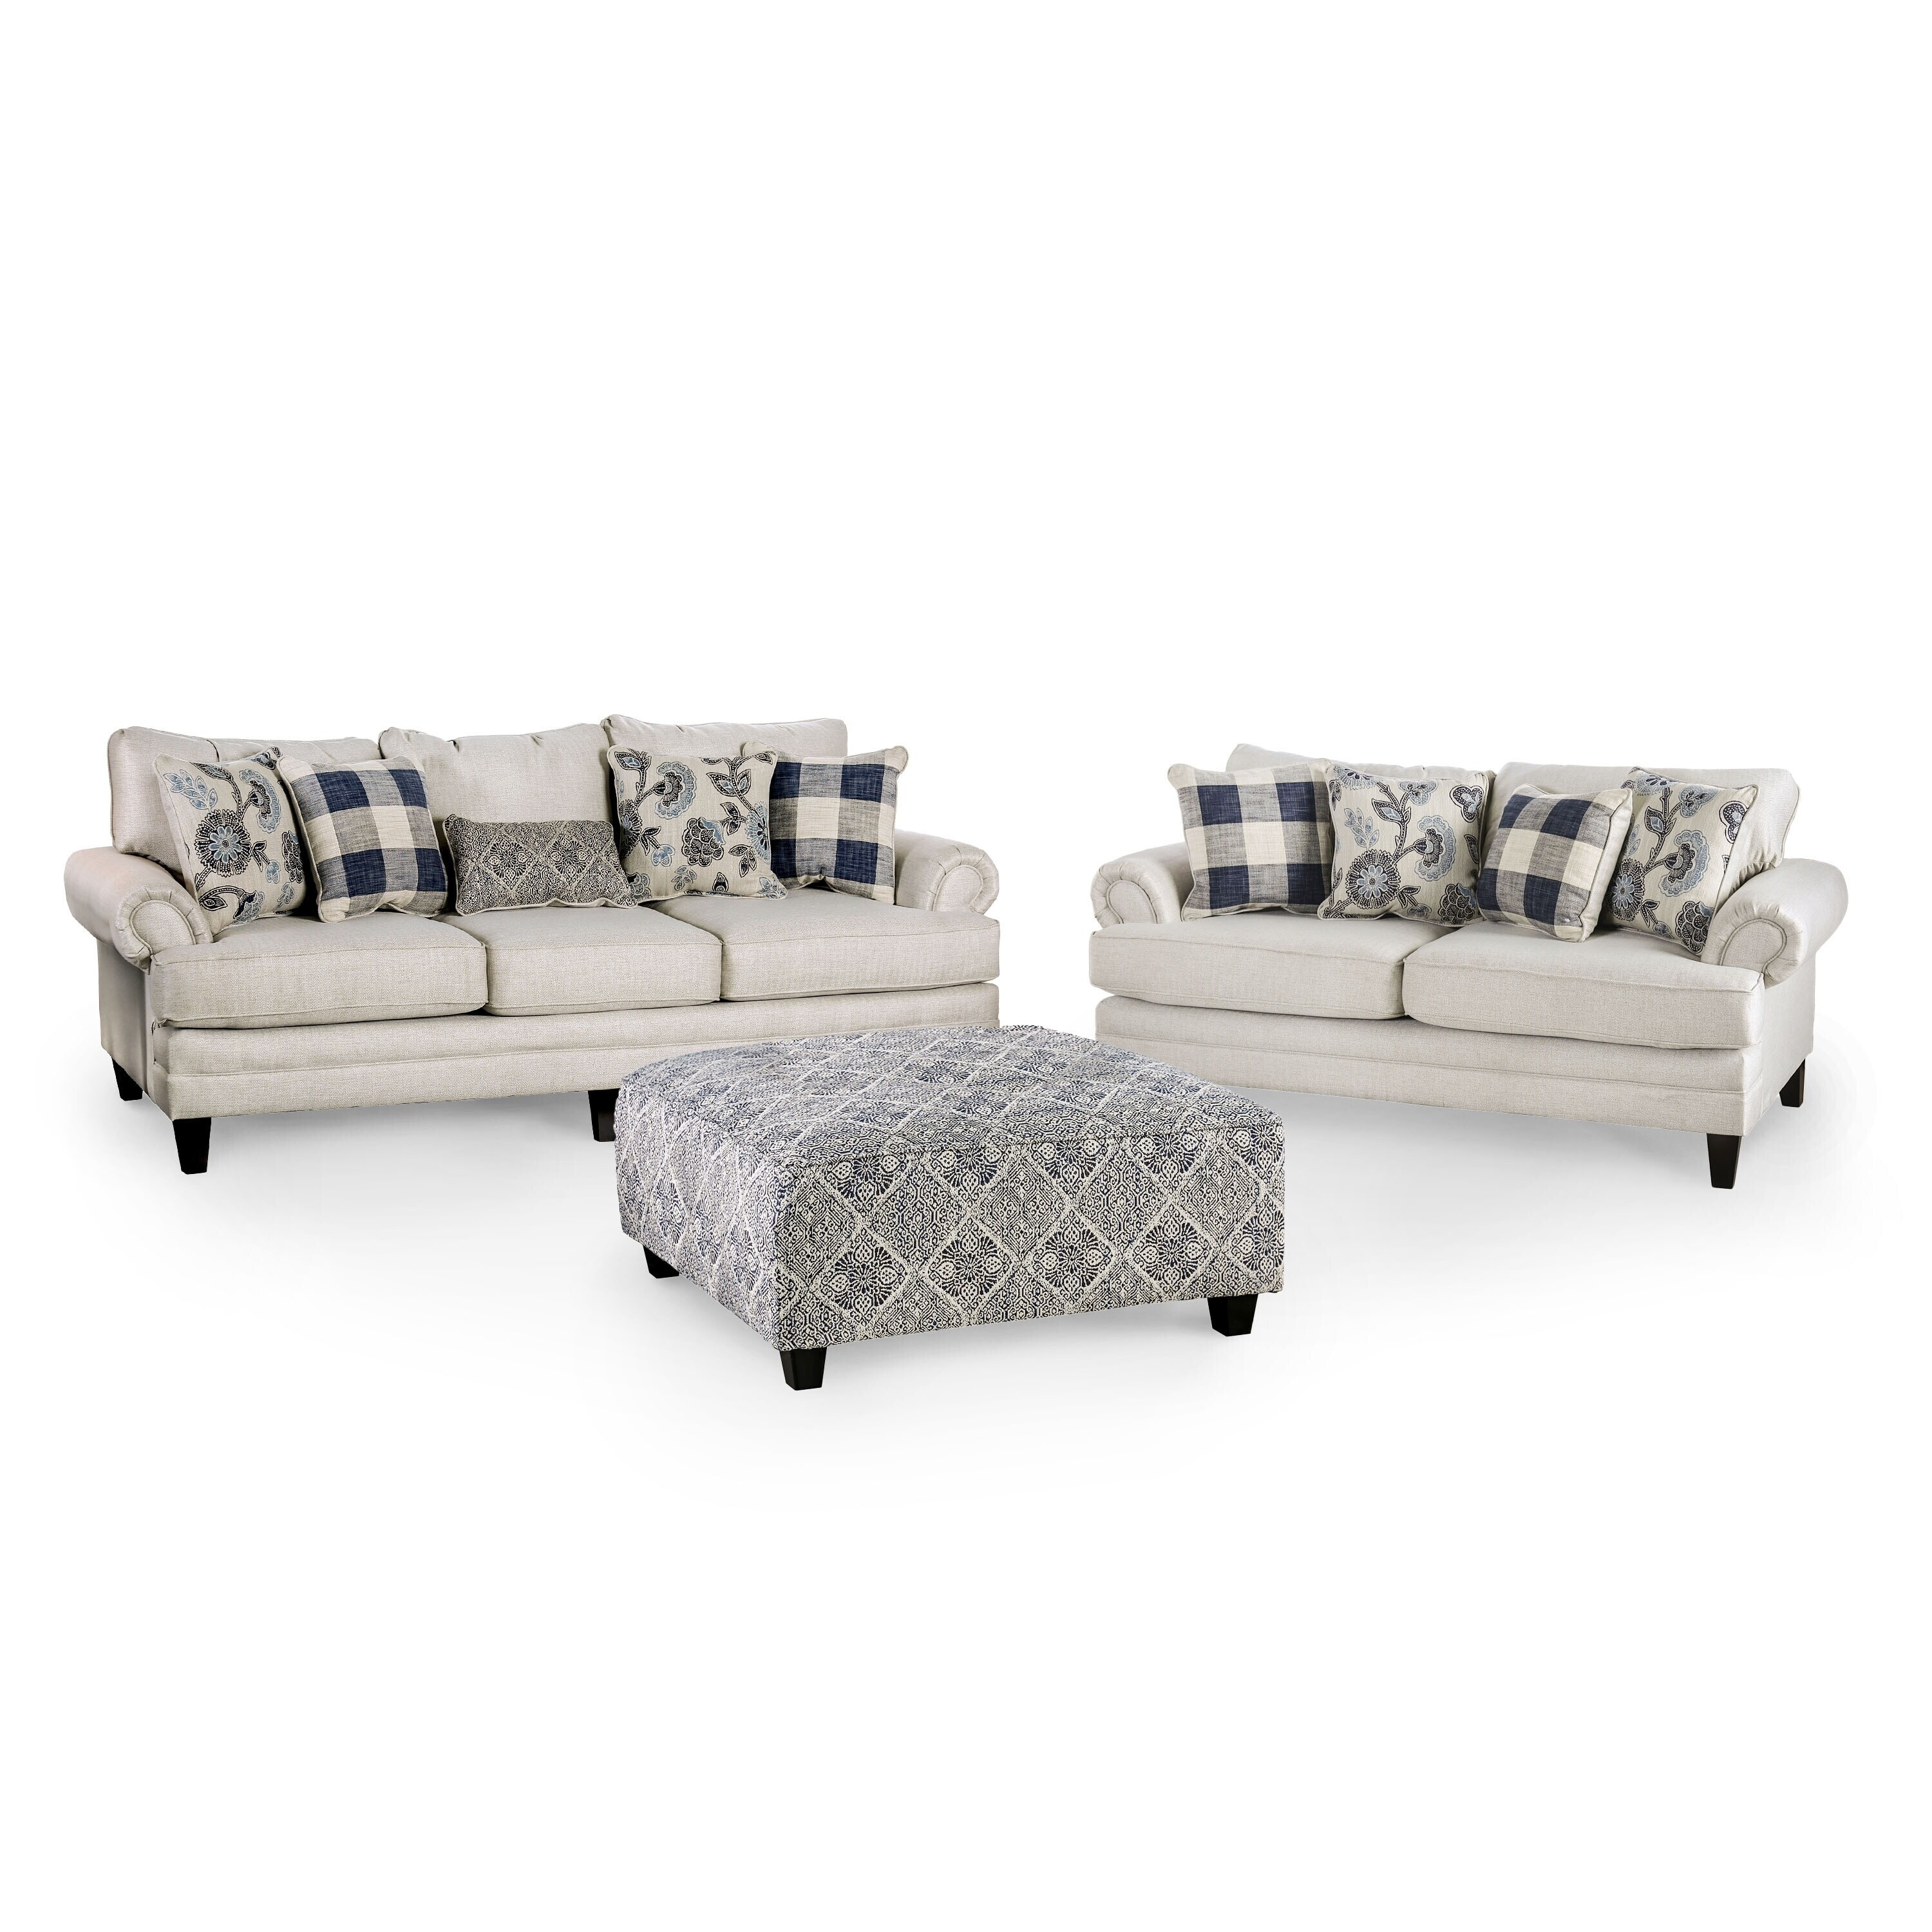 Traditional Country Living Room Furniture Set